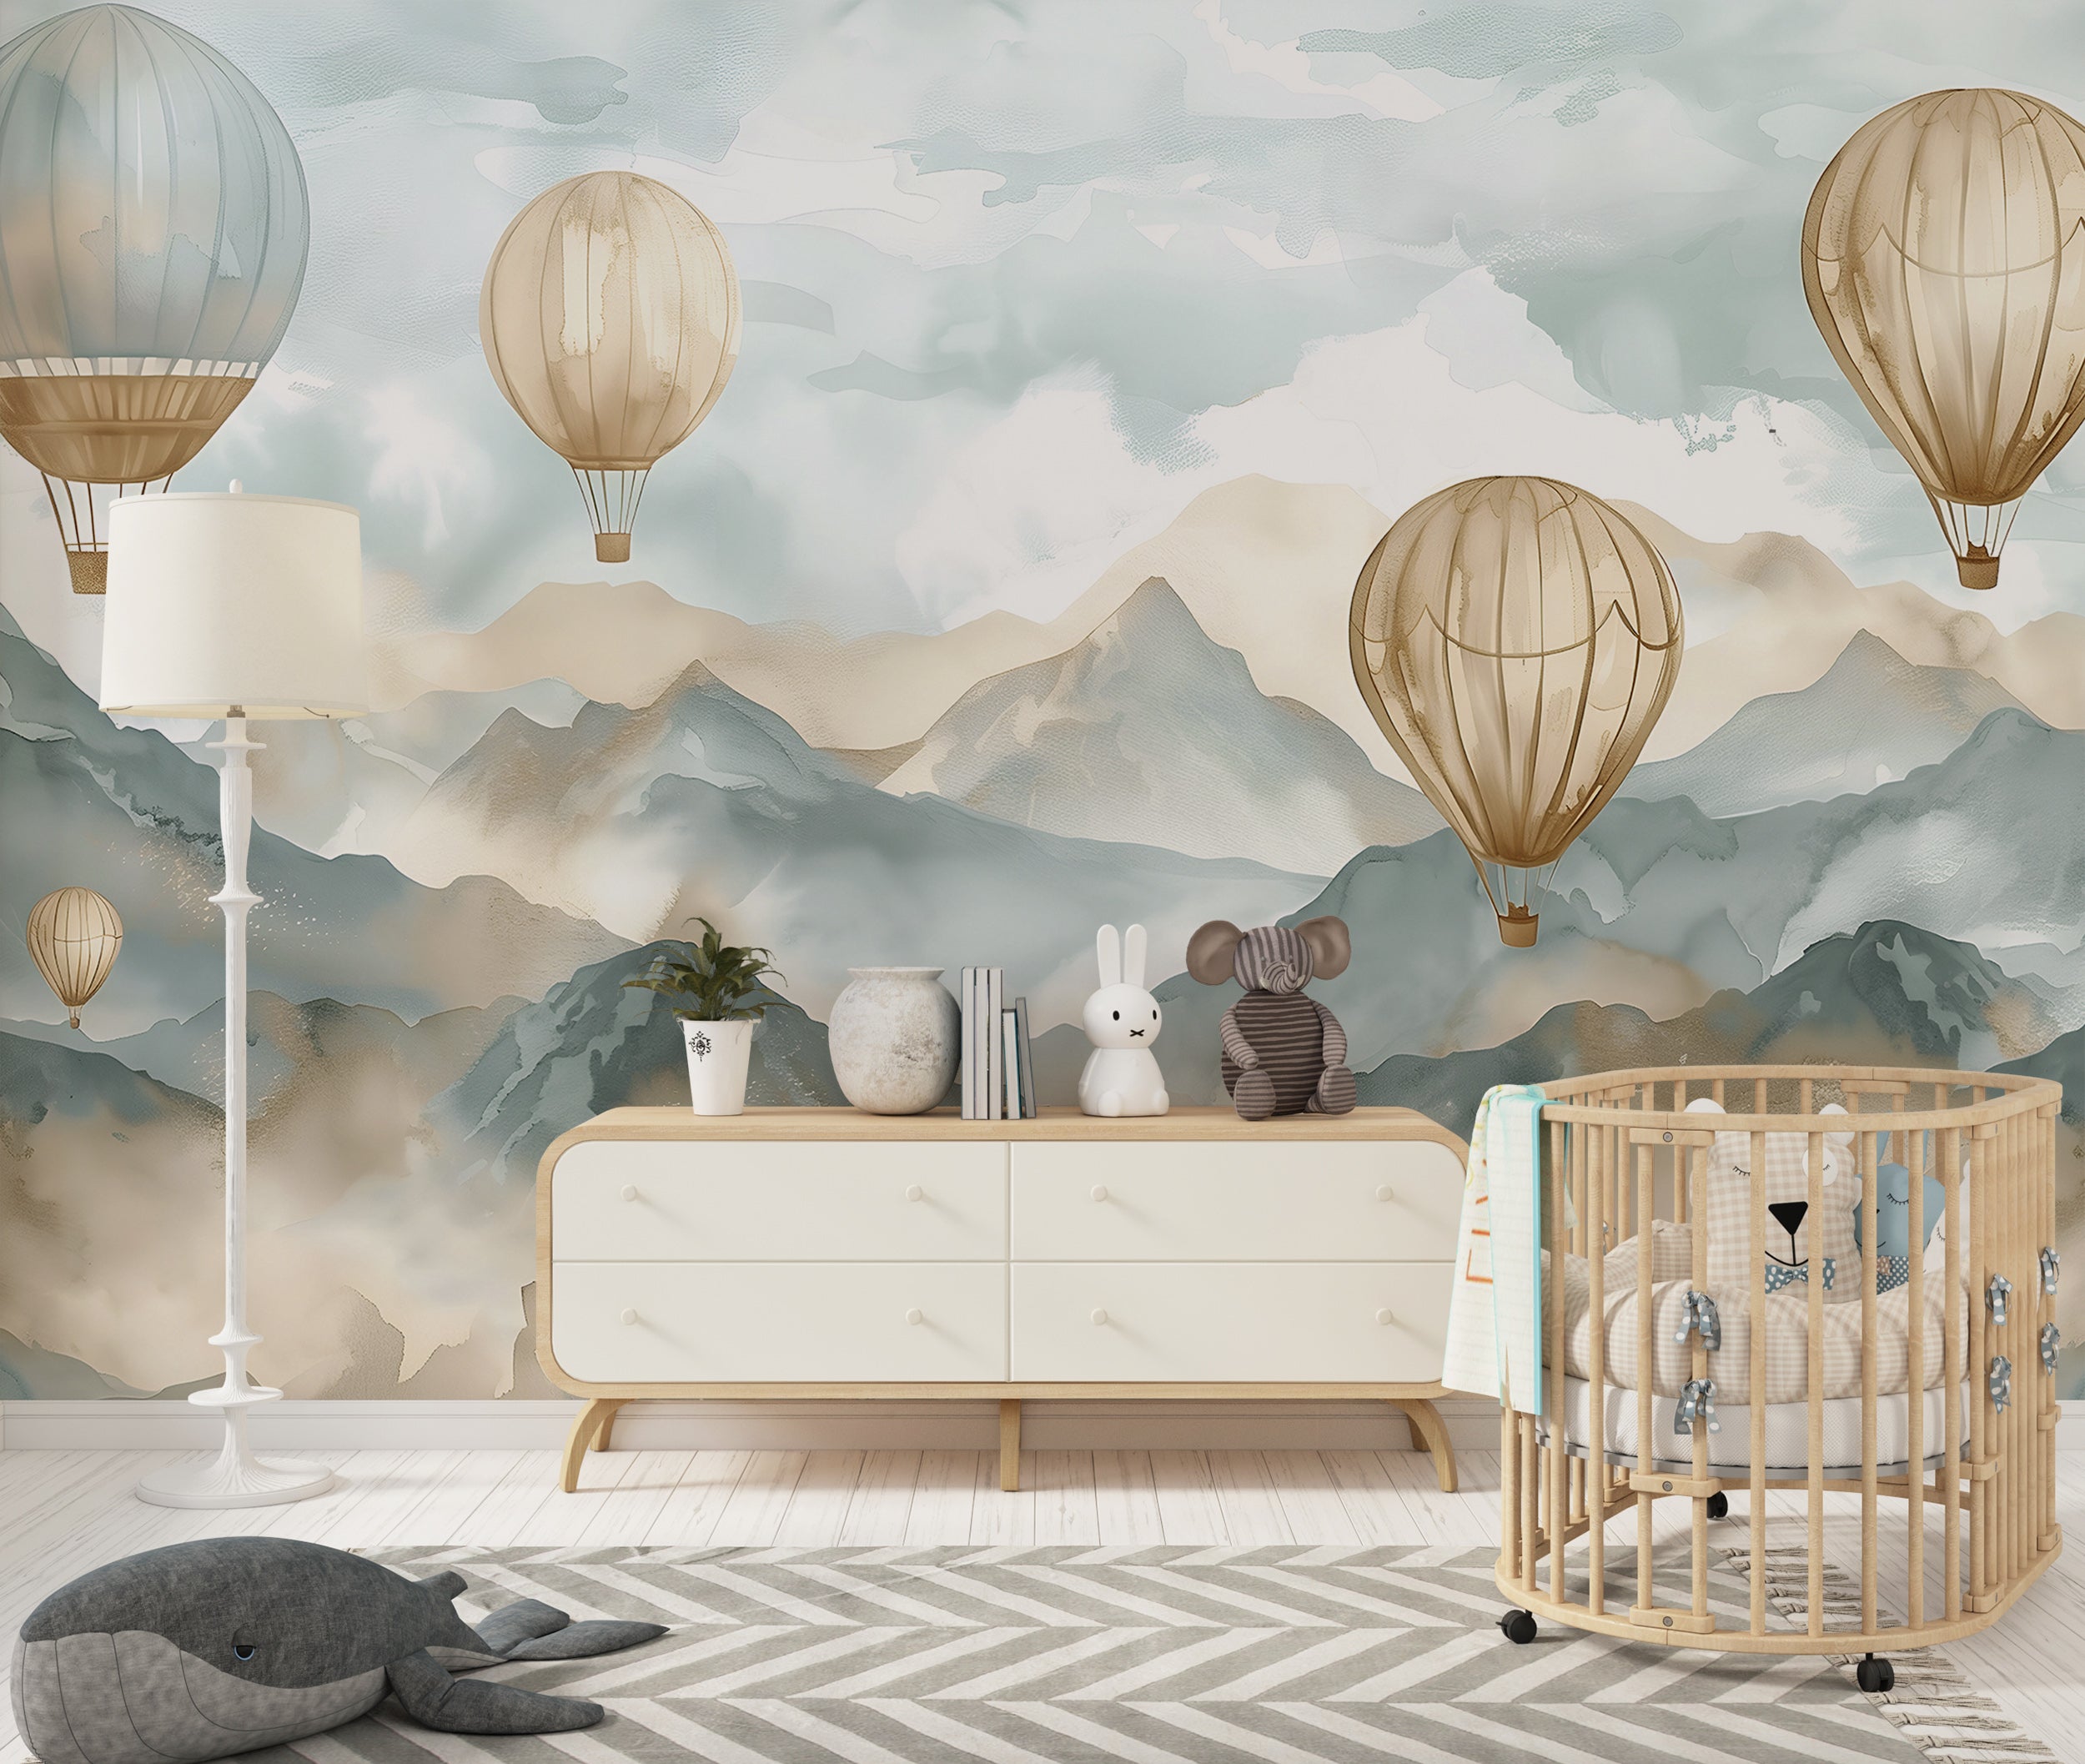 Watercolor mountains wallpaper for nursery Light blue mountains and hot air balloons wallpaper